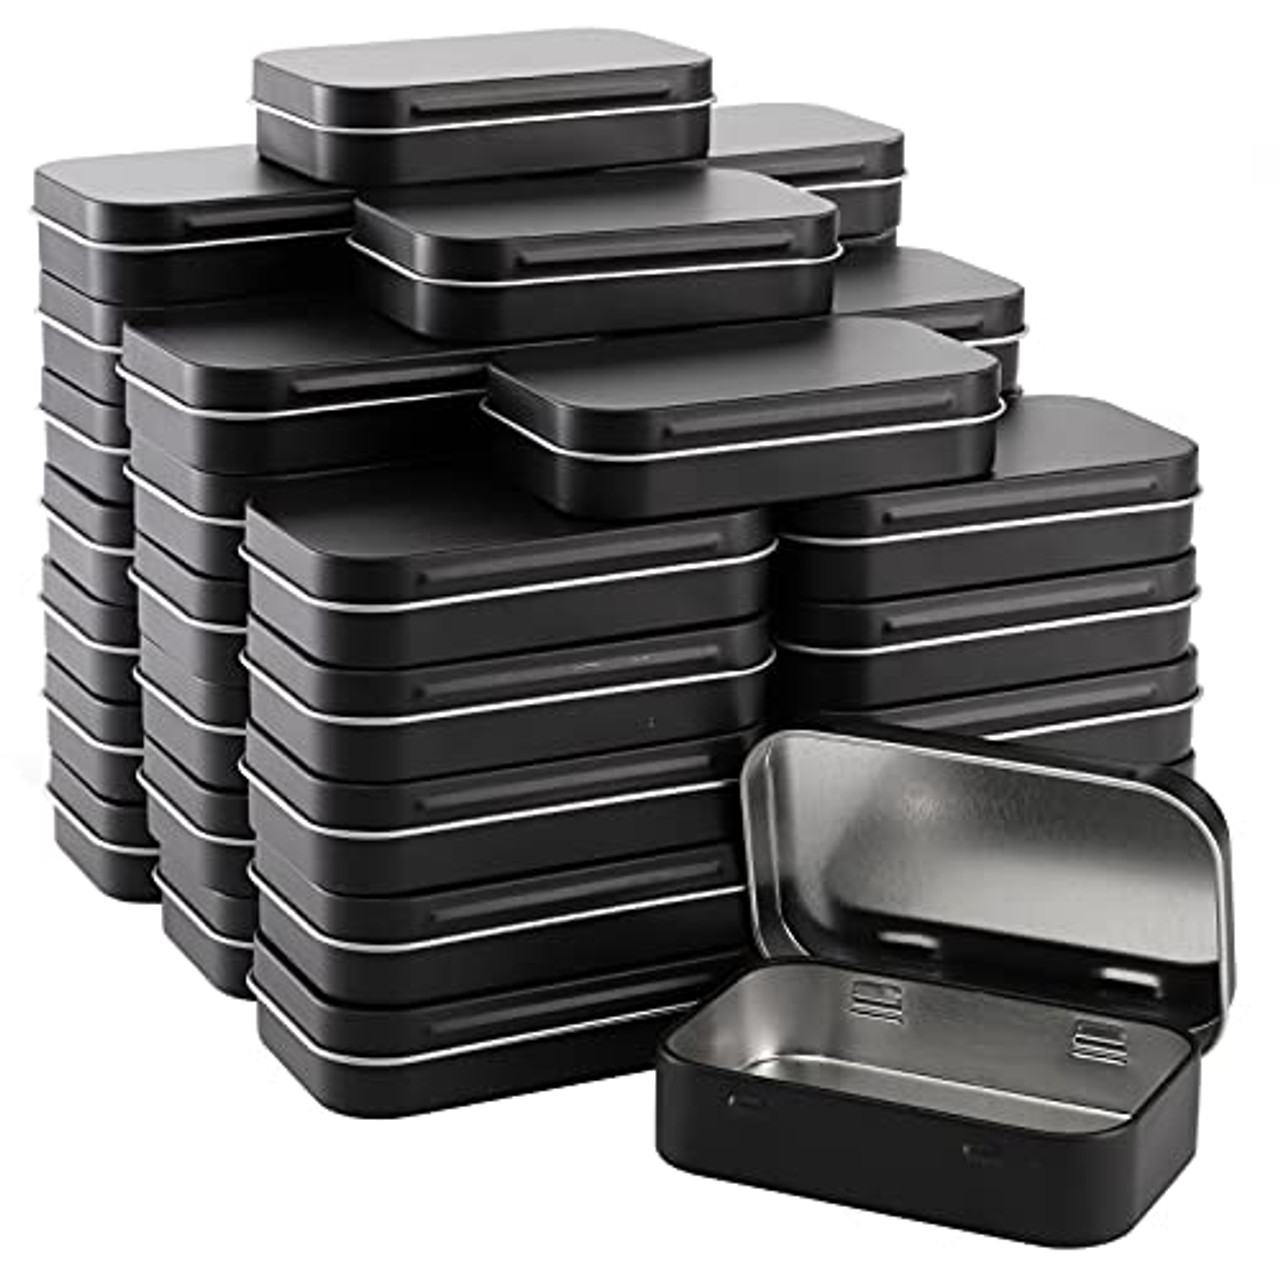 Aybloom Metal Rectangular Empty Hinged Tins - 30 Pack Silver Mini Portable  Box Containers Small Storage Kit & Home Organizer